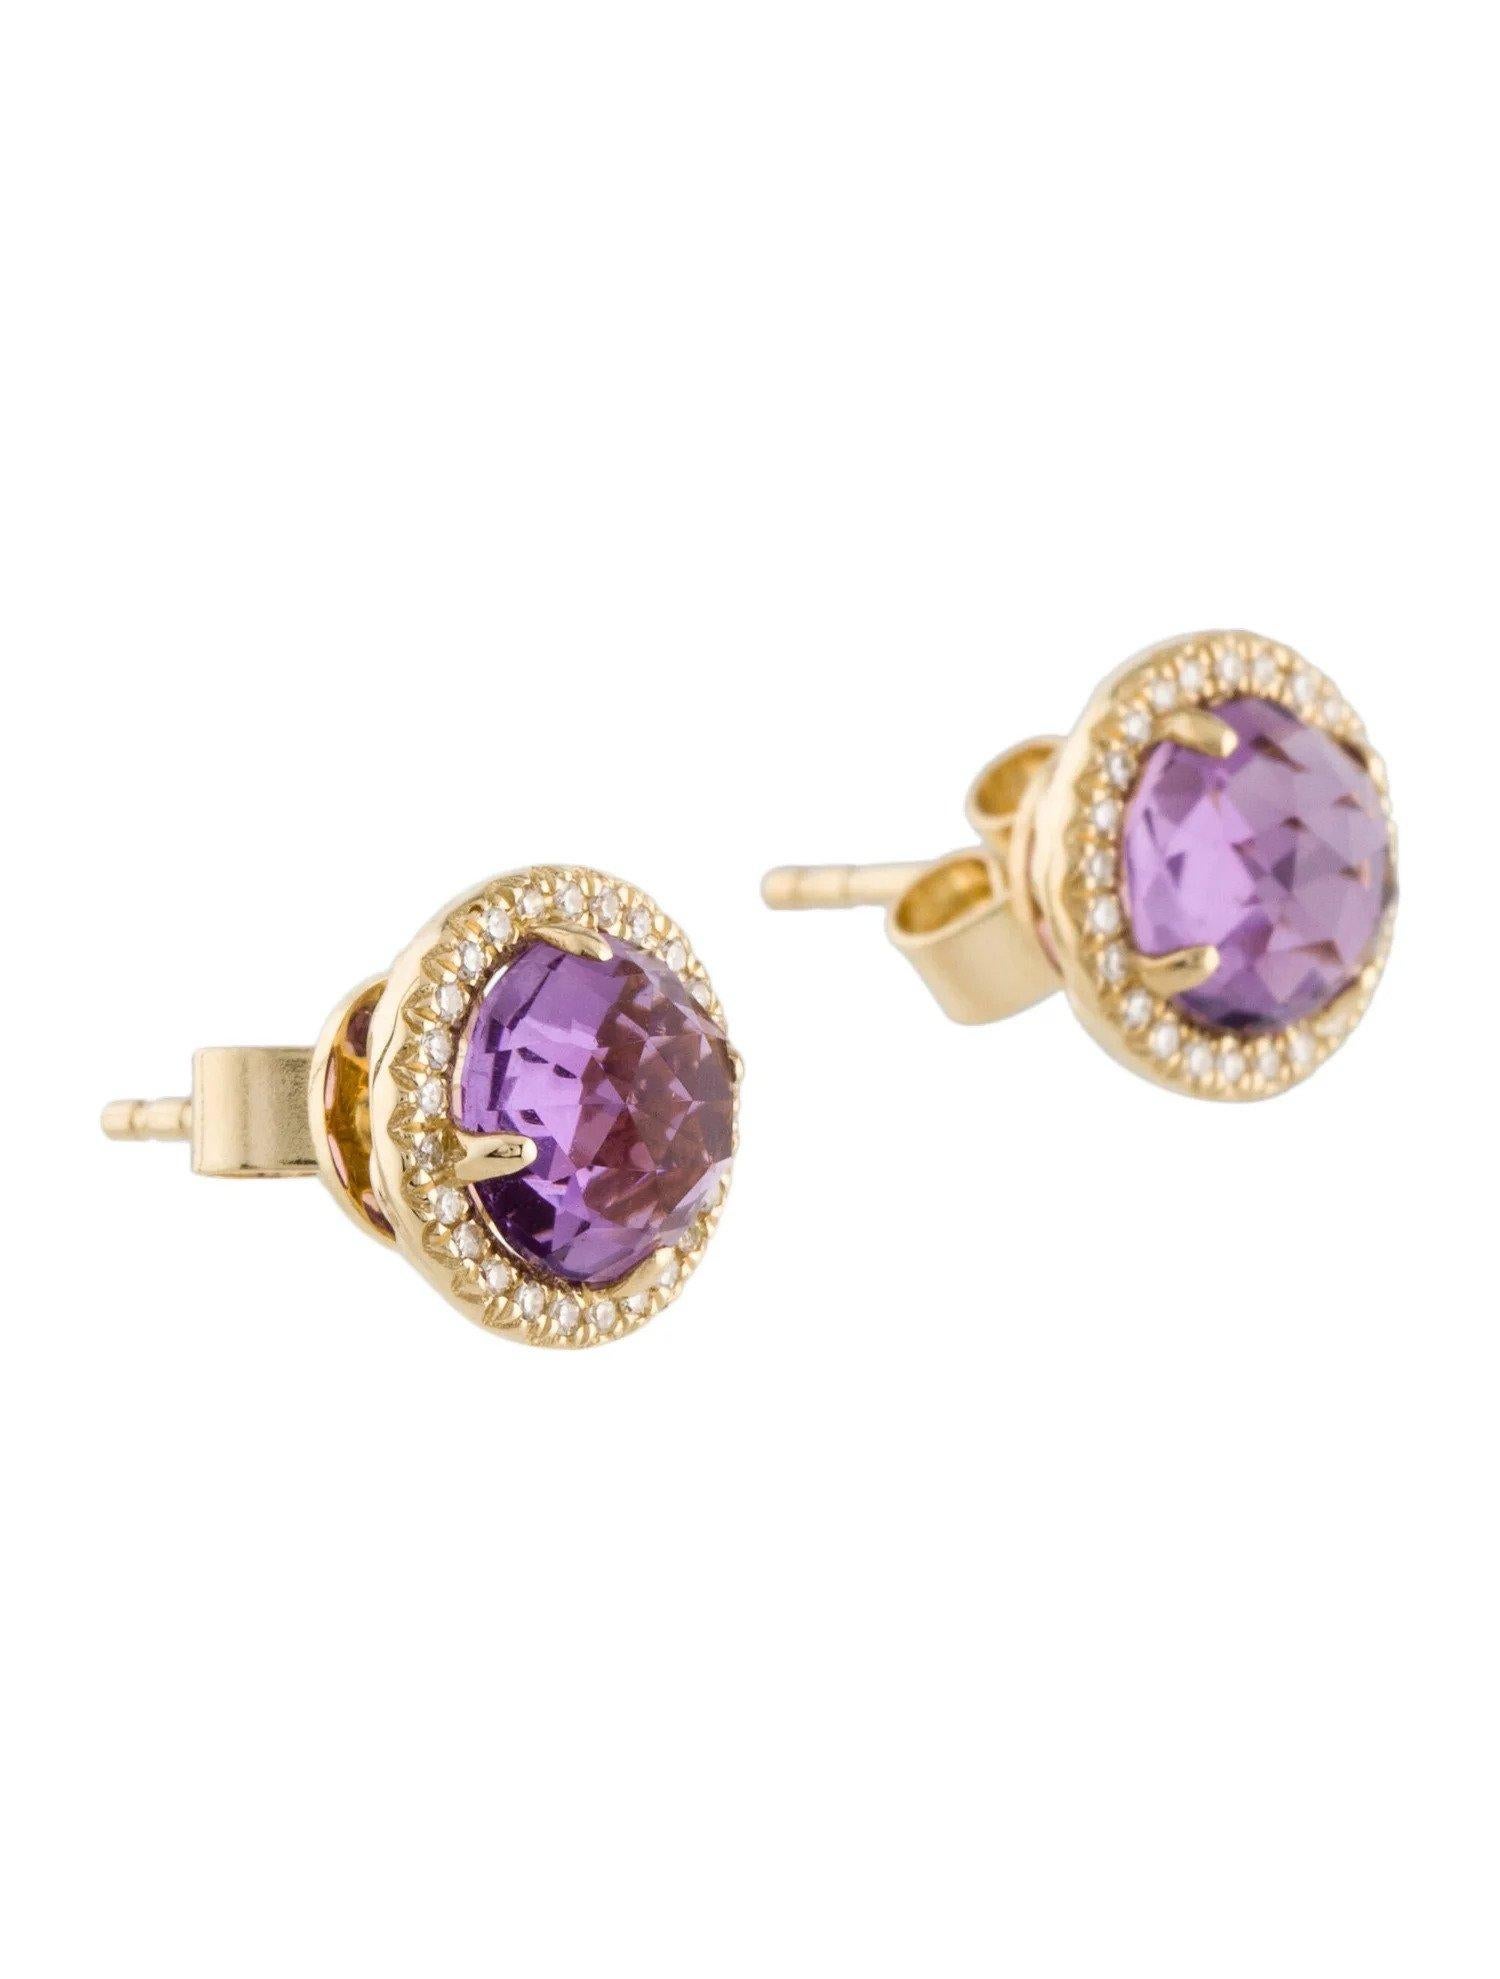 Round Cut 1.86 Carat Round Amethyst & Diamond Yellow Gold Stud Earrings For Sale